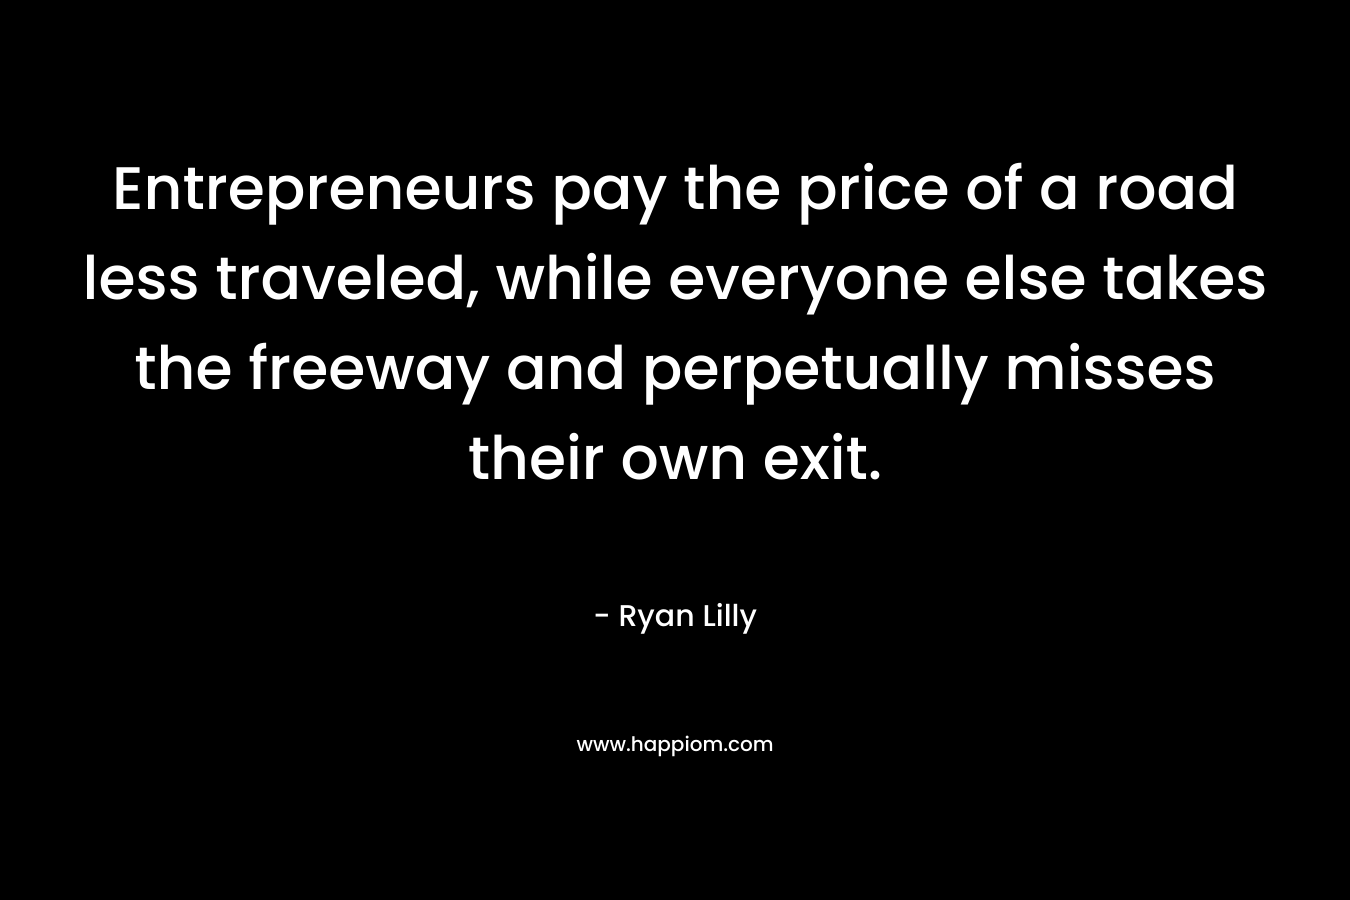 Entrepreneurs pay the price of a road less traveled, while everyone else takes the freeway and perpetually misses their own exit. – Ryan Lilly